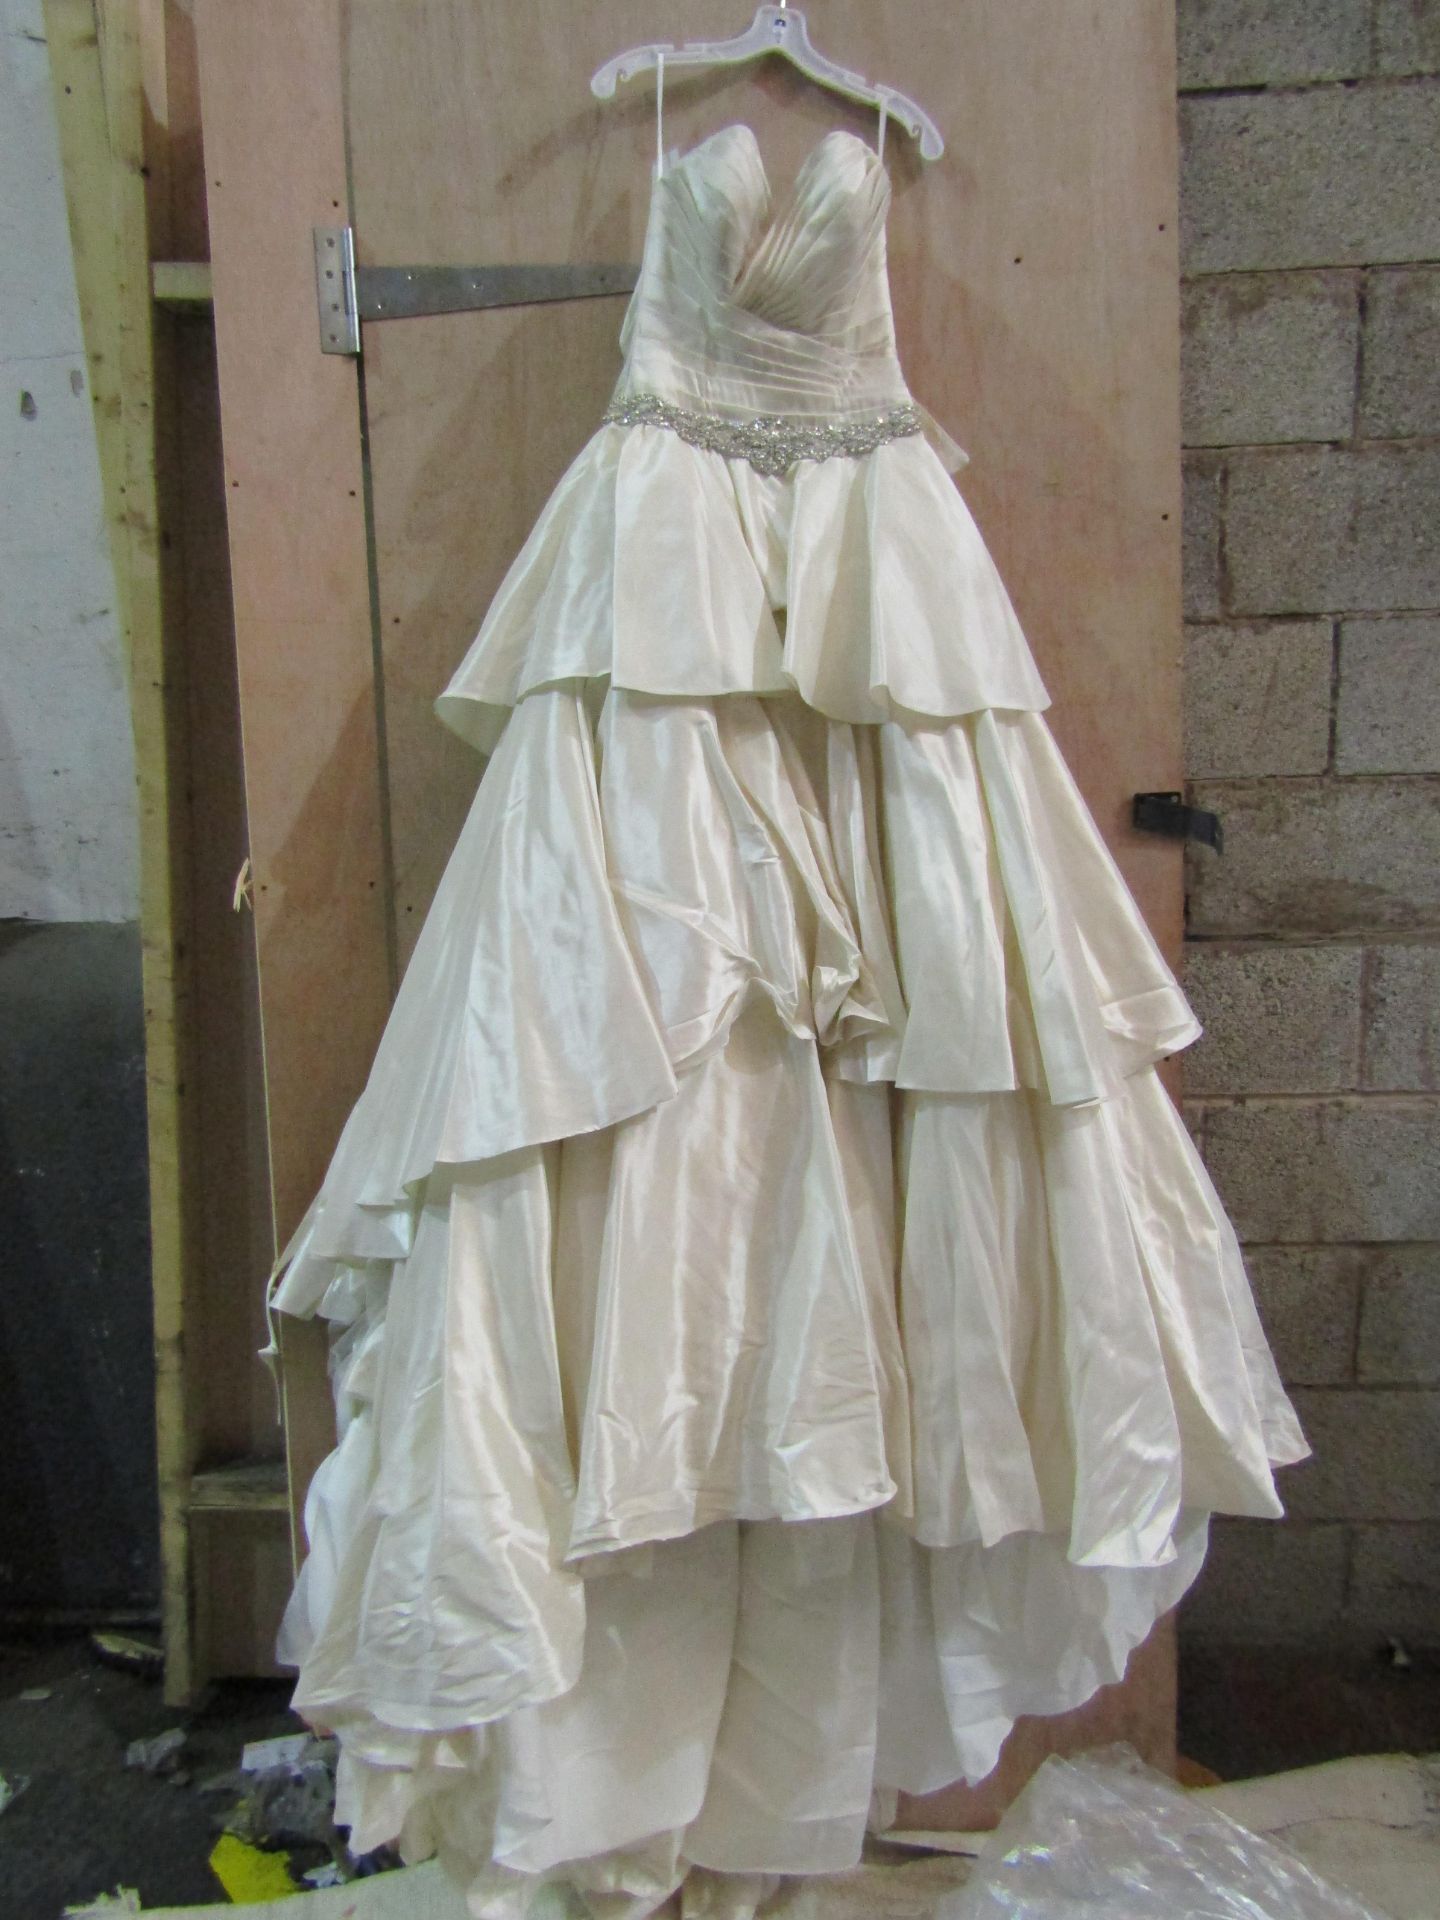 Approx 500 pieces of wedding shop stock to include wedding dresses, mother of the bride, dresses, - Image 53 of 71